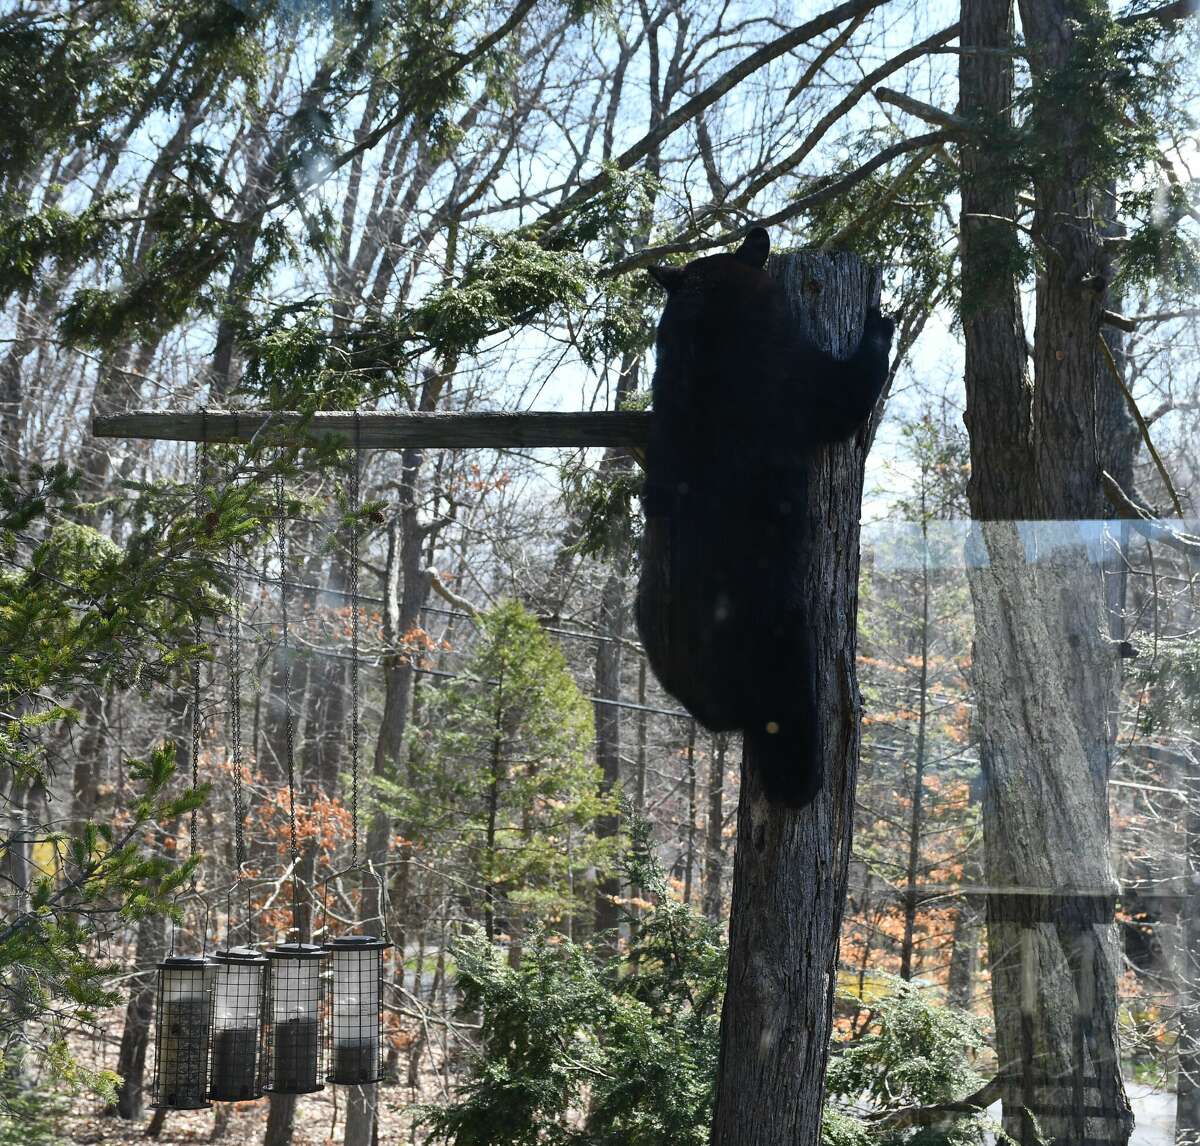 Black bear spotted climbing up a tree on Carmen Hill Road in Brookfield.